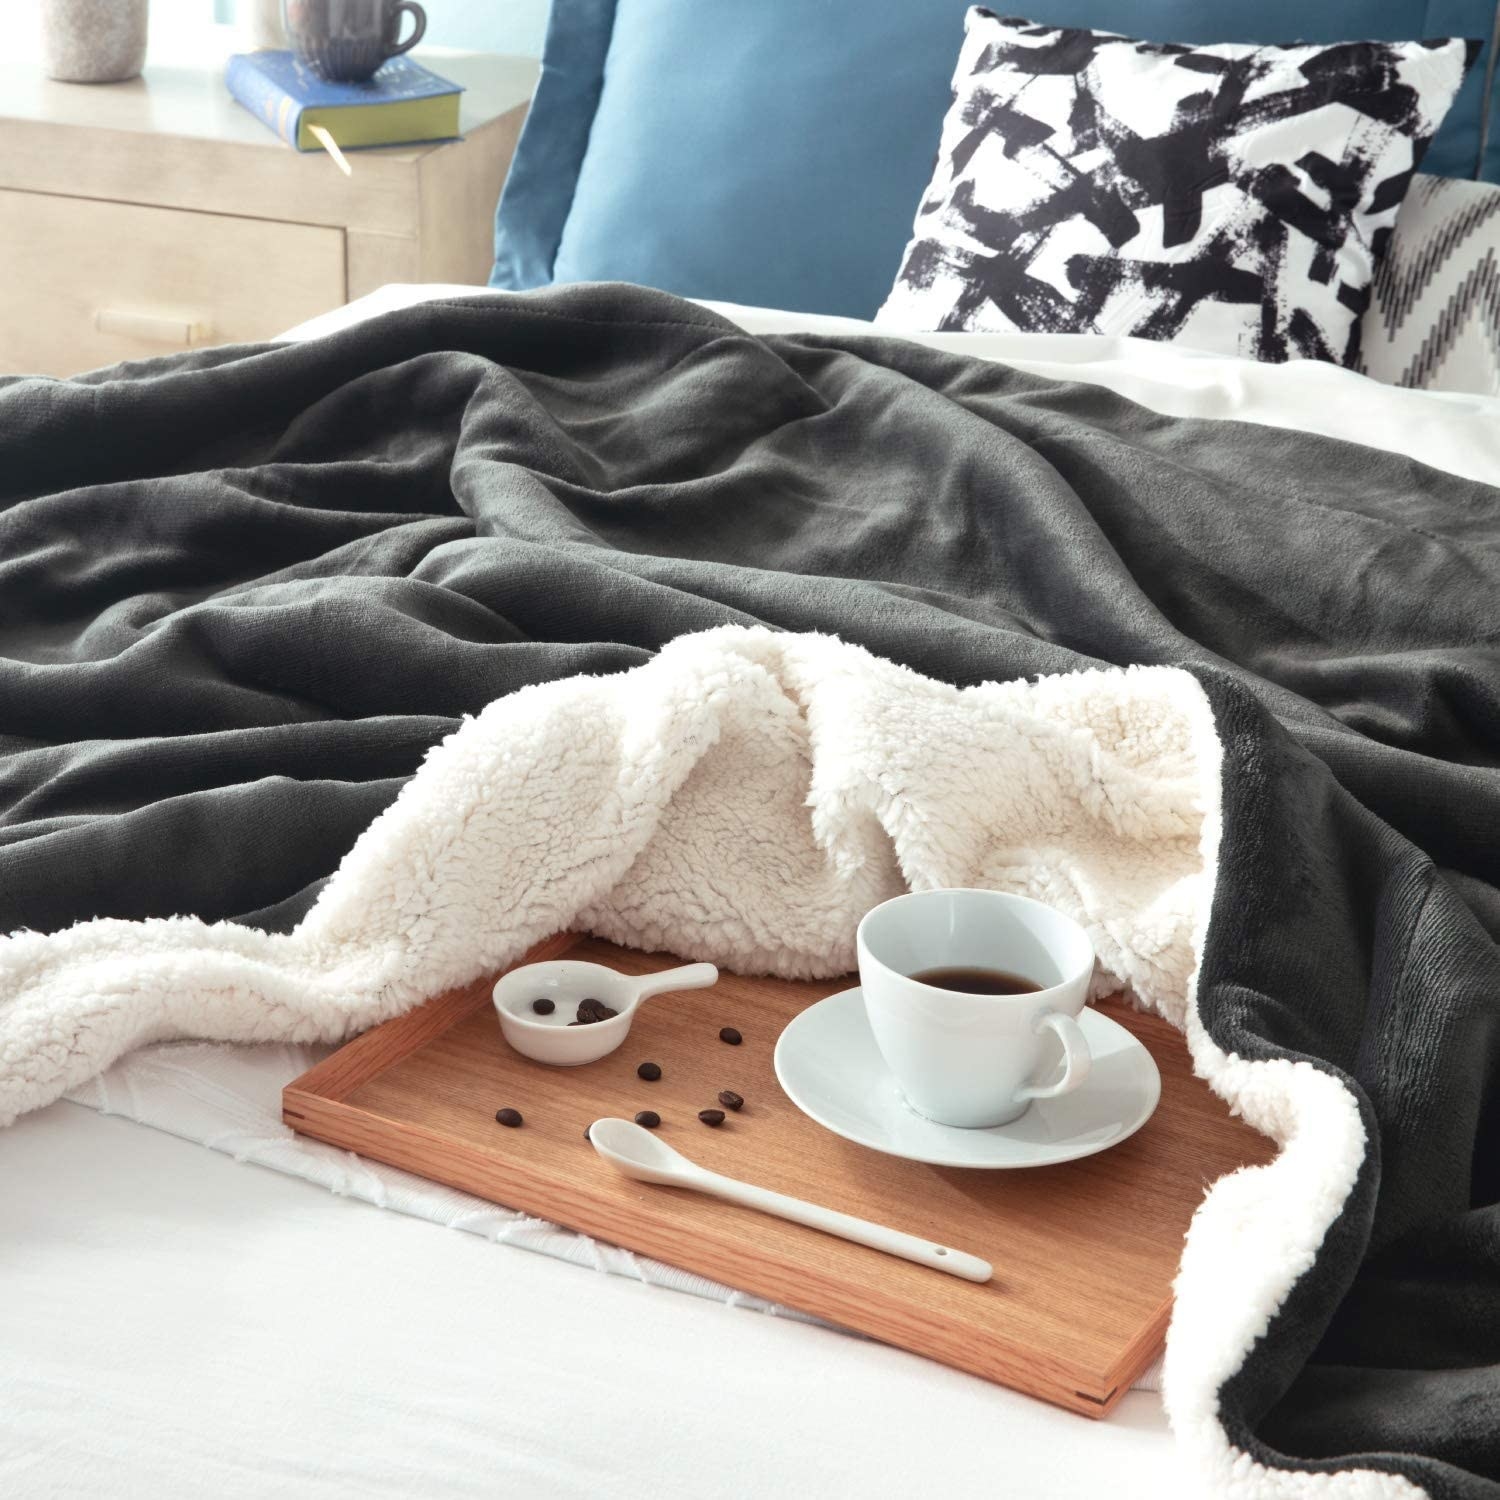 The blanket on a bed surrounding a serving tray with coffee on it